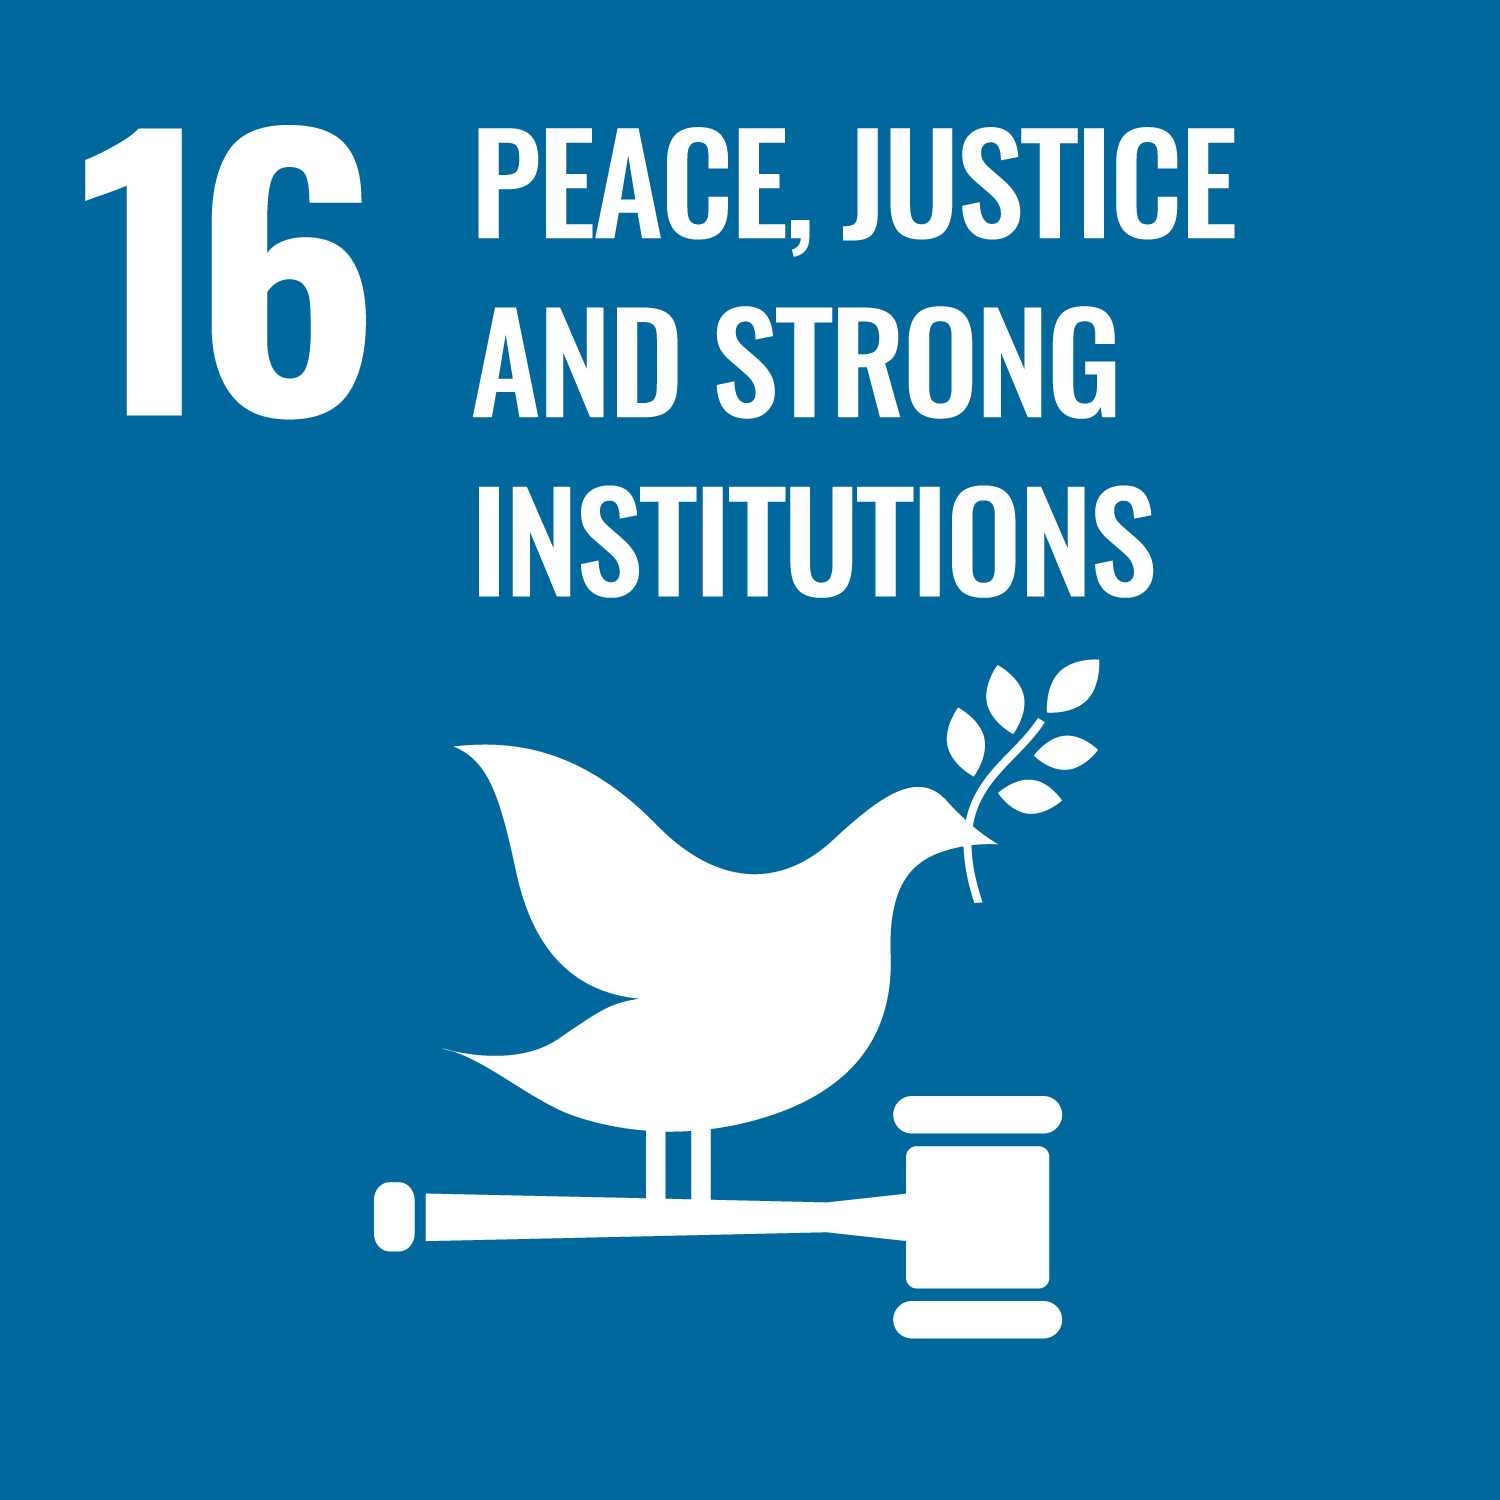 16.PEACE,JUSTICE AND STRONG INSTITUTIONS